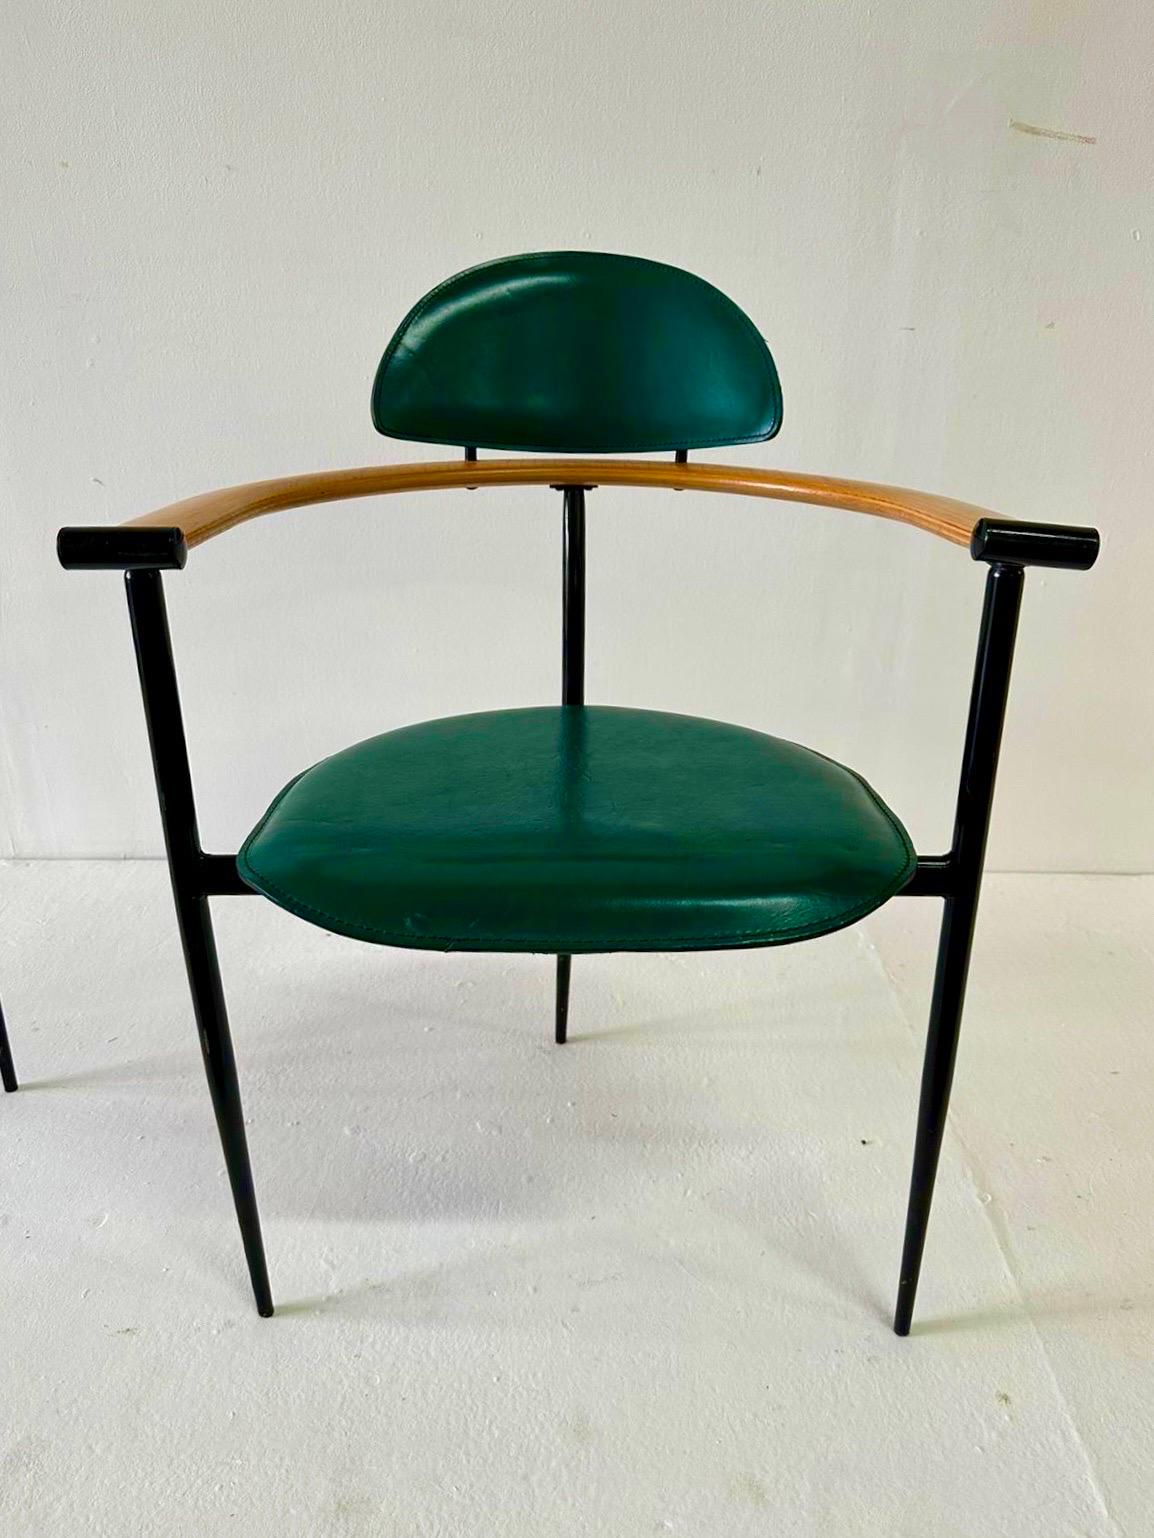 These Italian stitched green leather chairs with natural wood armrests and steel frame by ARRBEN ITALIA.  Four chairs are all vintage and simply stunning.  Green is vivid in light - see all pics and video.  Comfortable and perfect for small dining